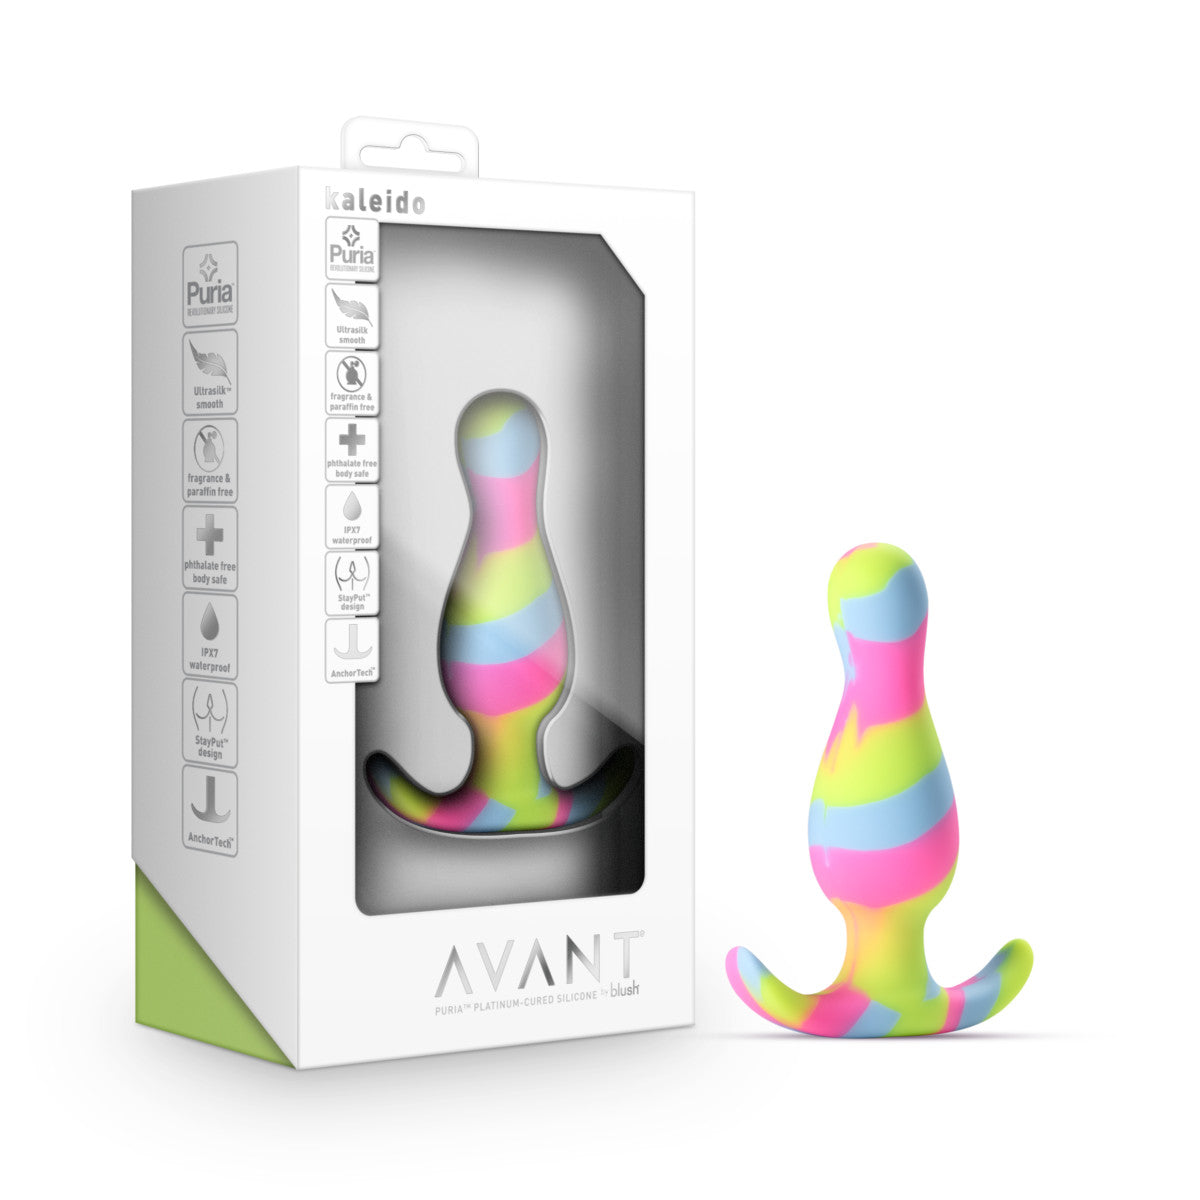 Blush Avant | Kaleido Lime: Artisan 3 Inch Tapered Stayput™ Butt Plug with Pleasure Curves - Elegantly Made with Smooth Ultrasilk® Purio™ Silicone